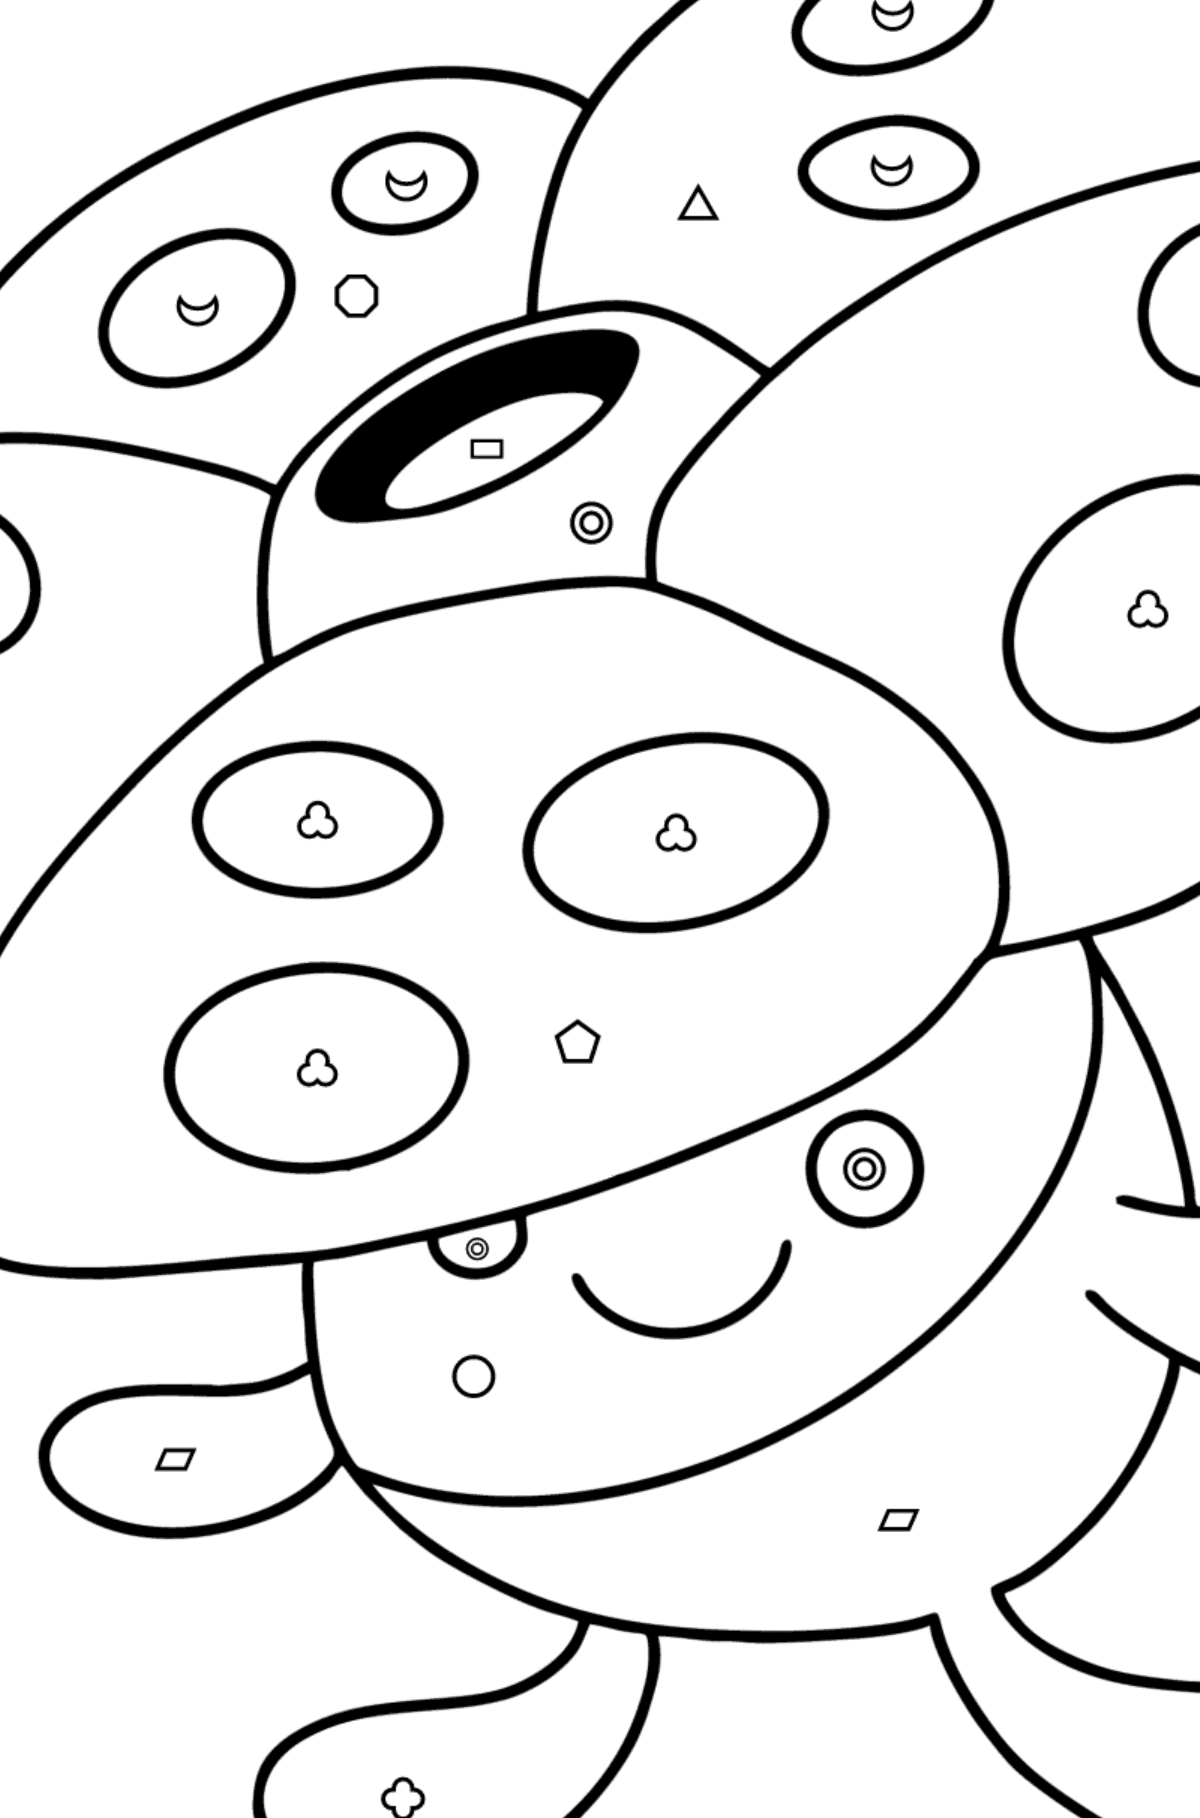 Coloring page Pokémon Go Vileplume - Coloring by Geometric Shapes for Kids